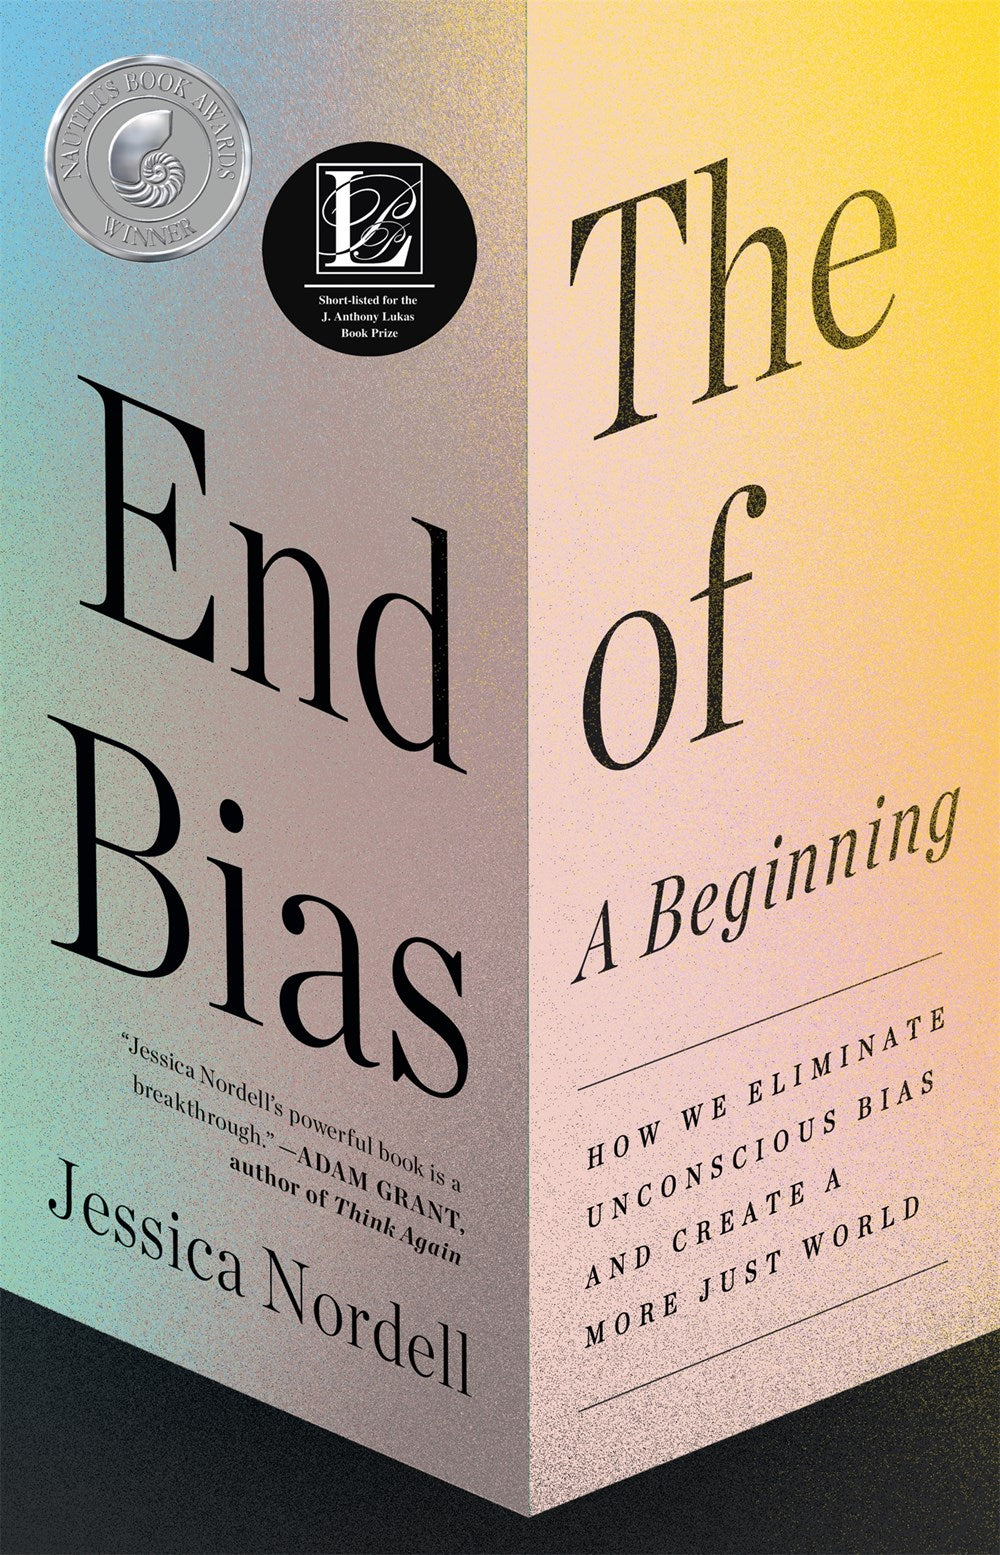 The End of Bias: A Beginning : How We Eliminate Unconscious Bias and Create a More Just World